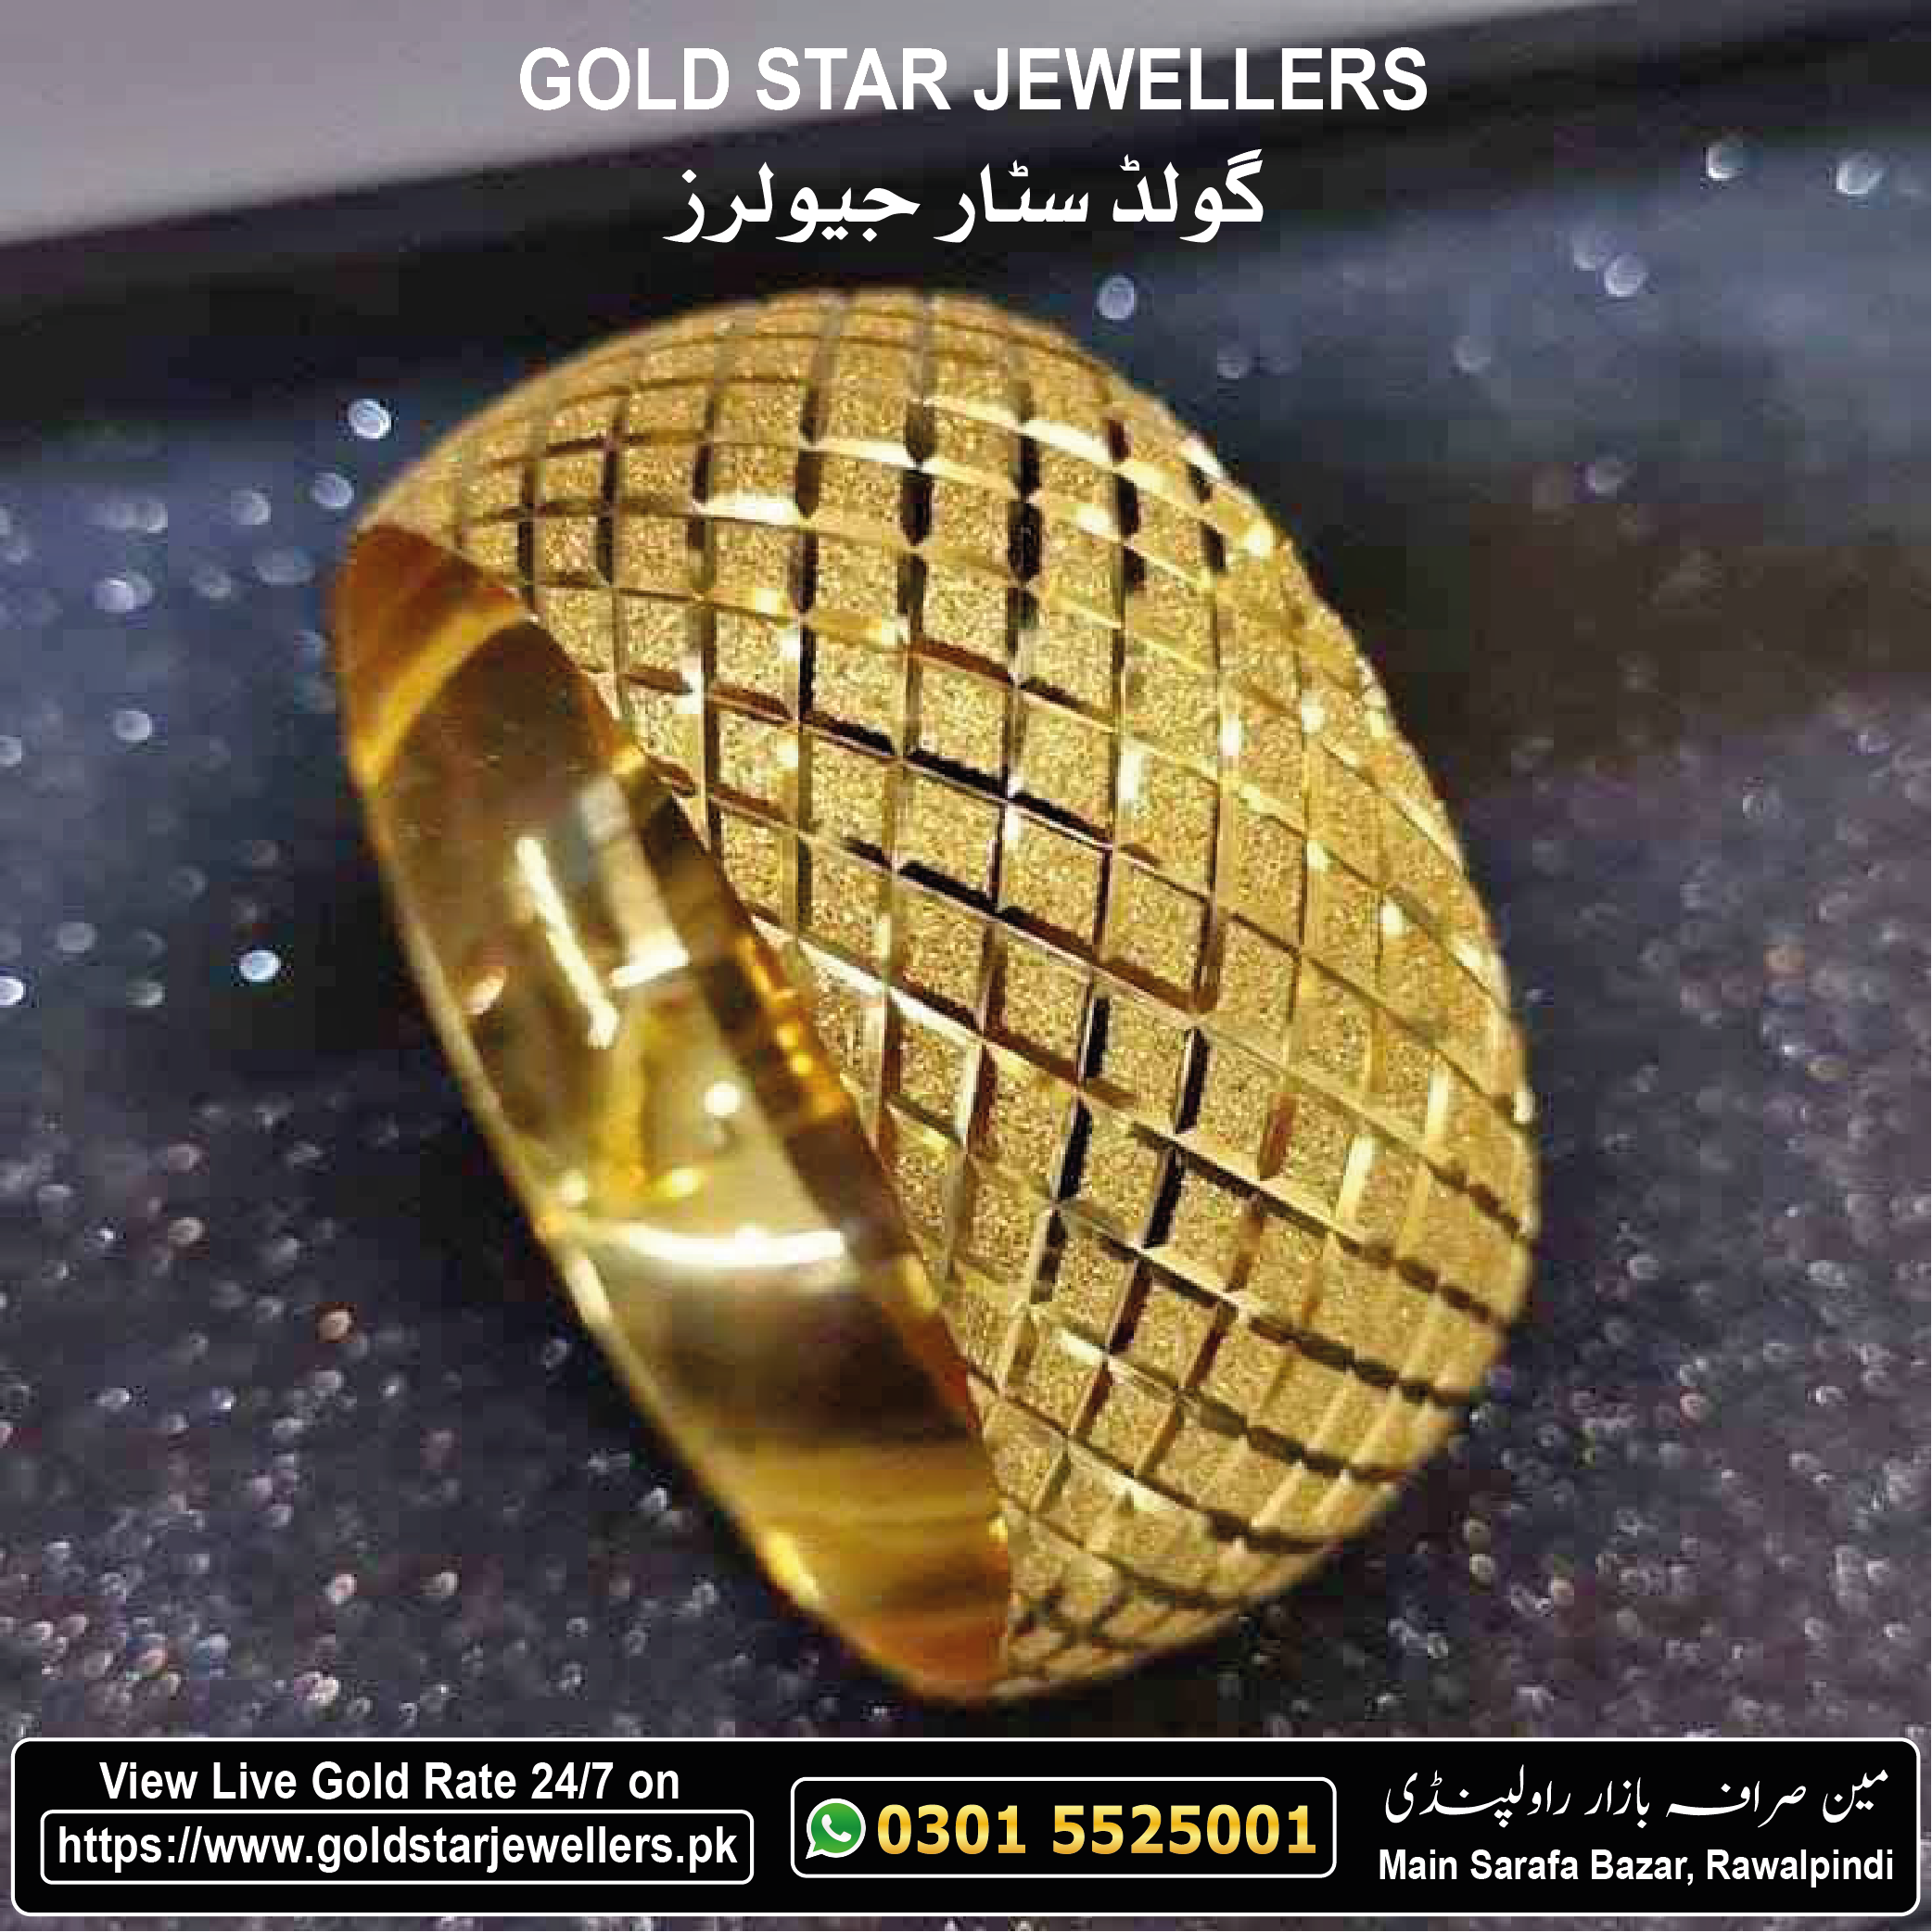 Latest Light 22k Gold Ring Designs with Weight and Price 2022 | Bridal  jewelry diy, Gold ring designs, Gold mangalsutra designs